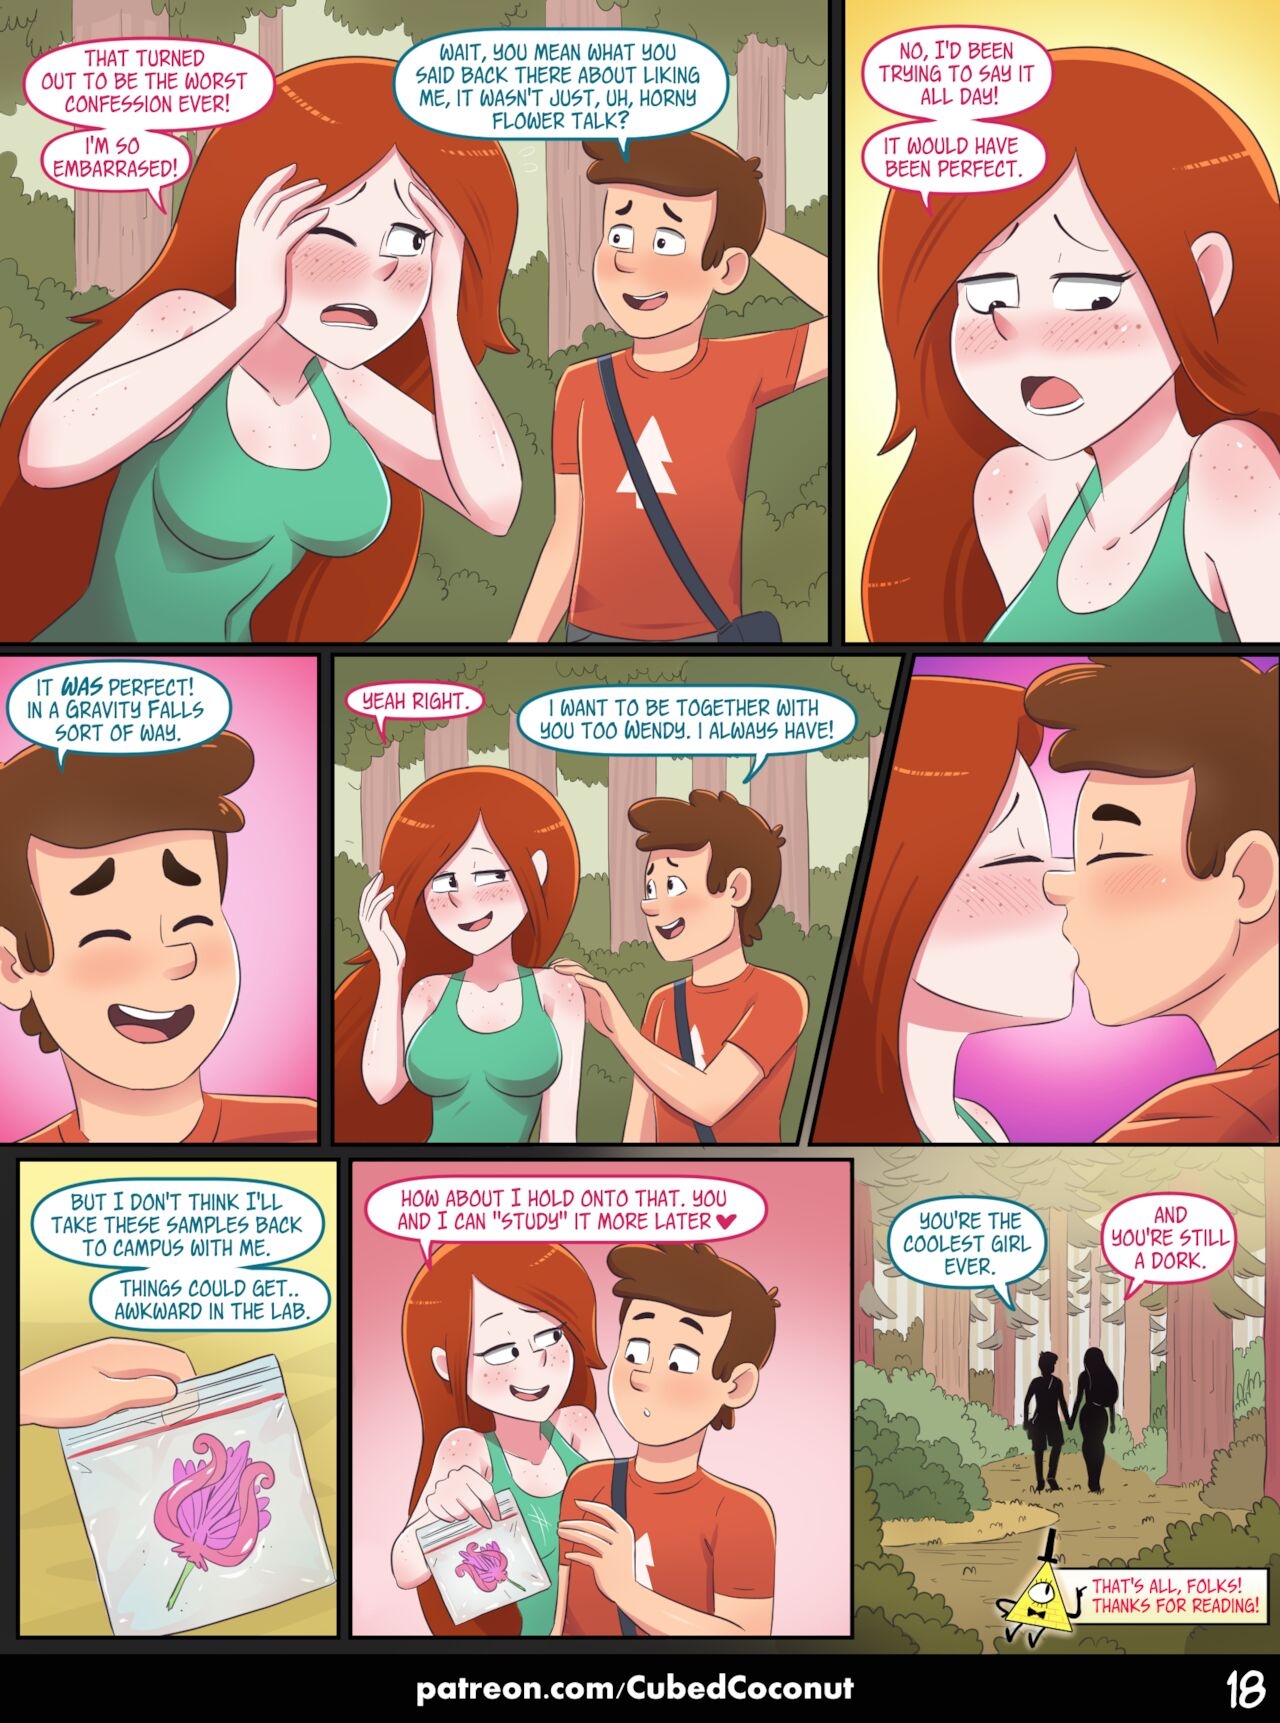 [Cubed Coconut] Wendy's Confession (Gravity Falls) 18